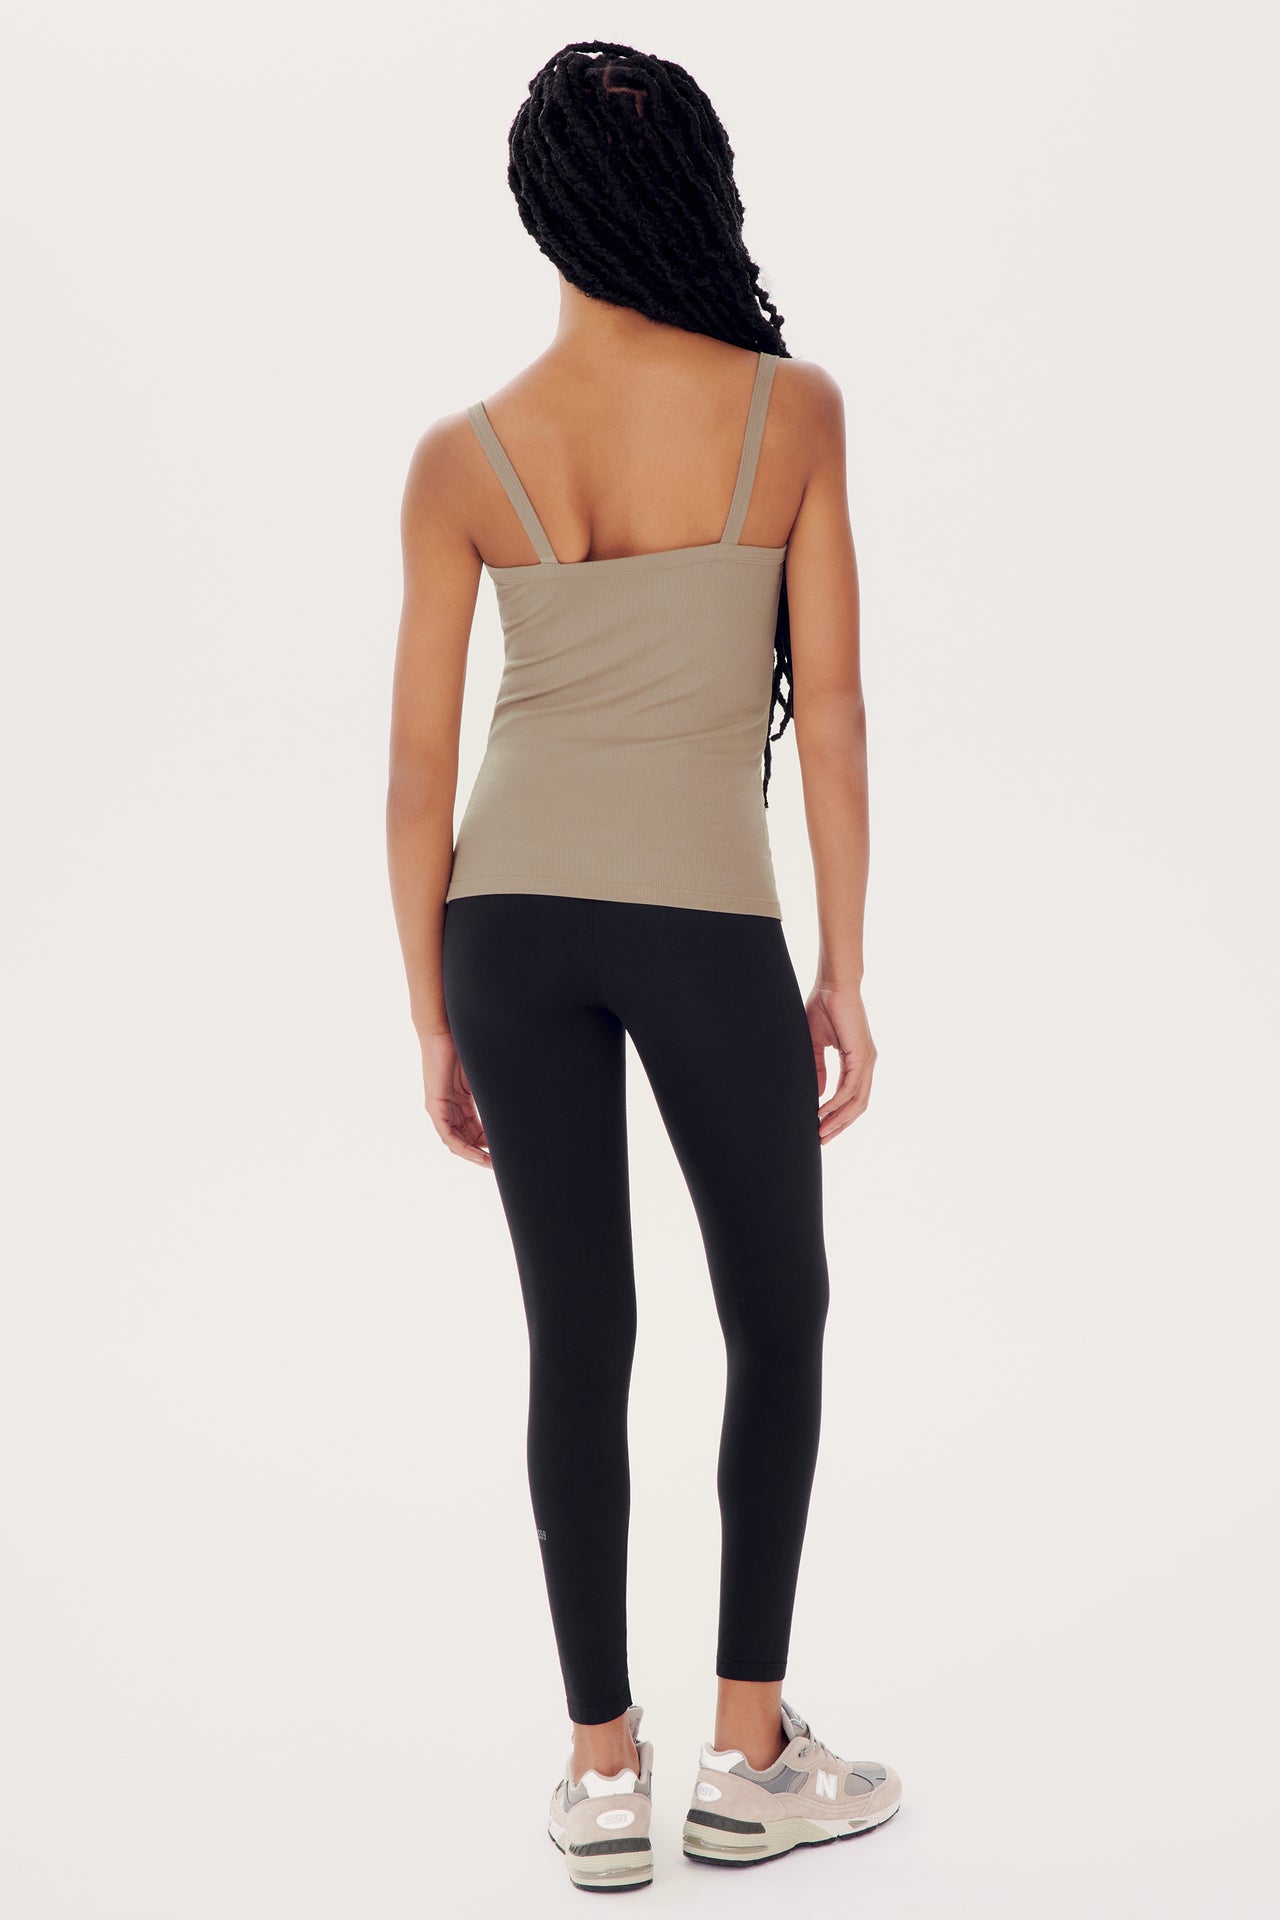 A woman standing with her back to the camera, wearing black leggings, a Romy Rib Tank in Latte by SPLITS59 with a square neckline, and white sneakers.